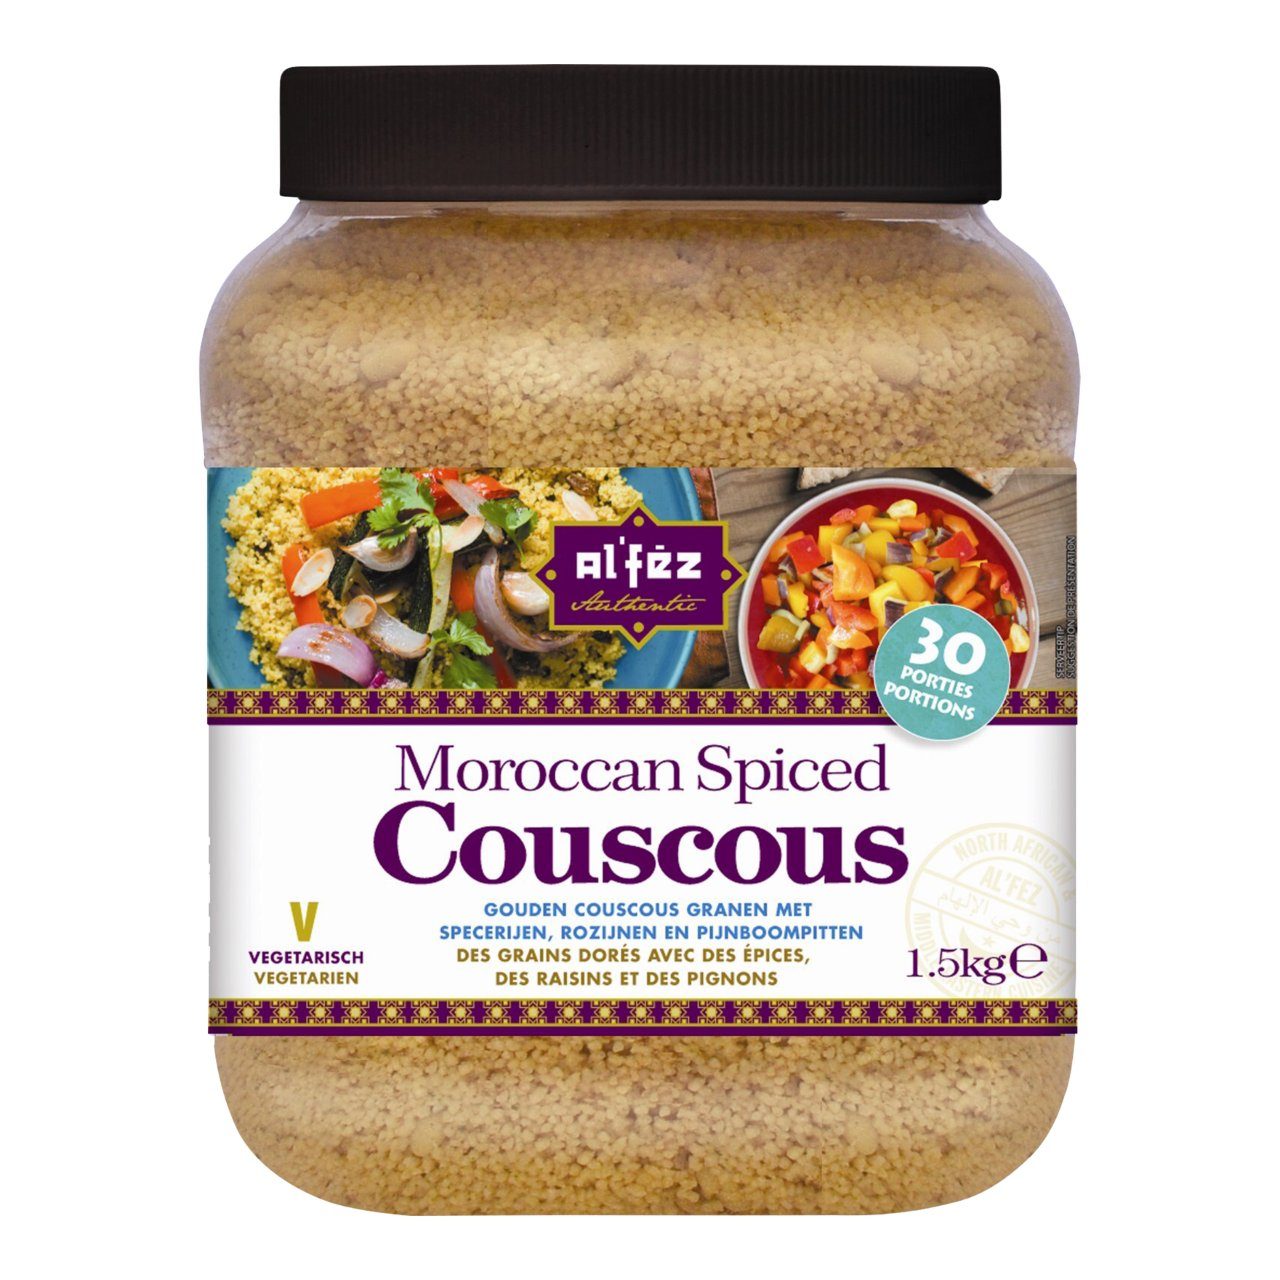 Moroccan spiced couscous